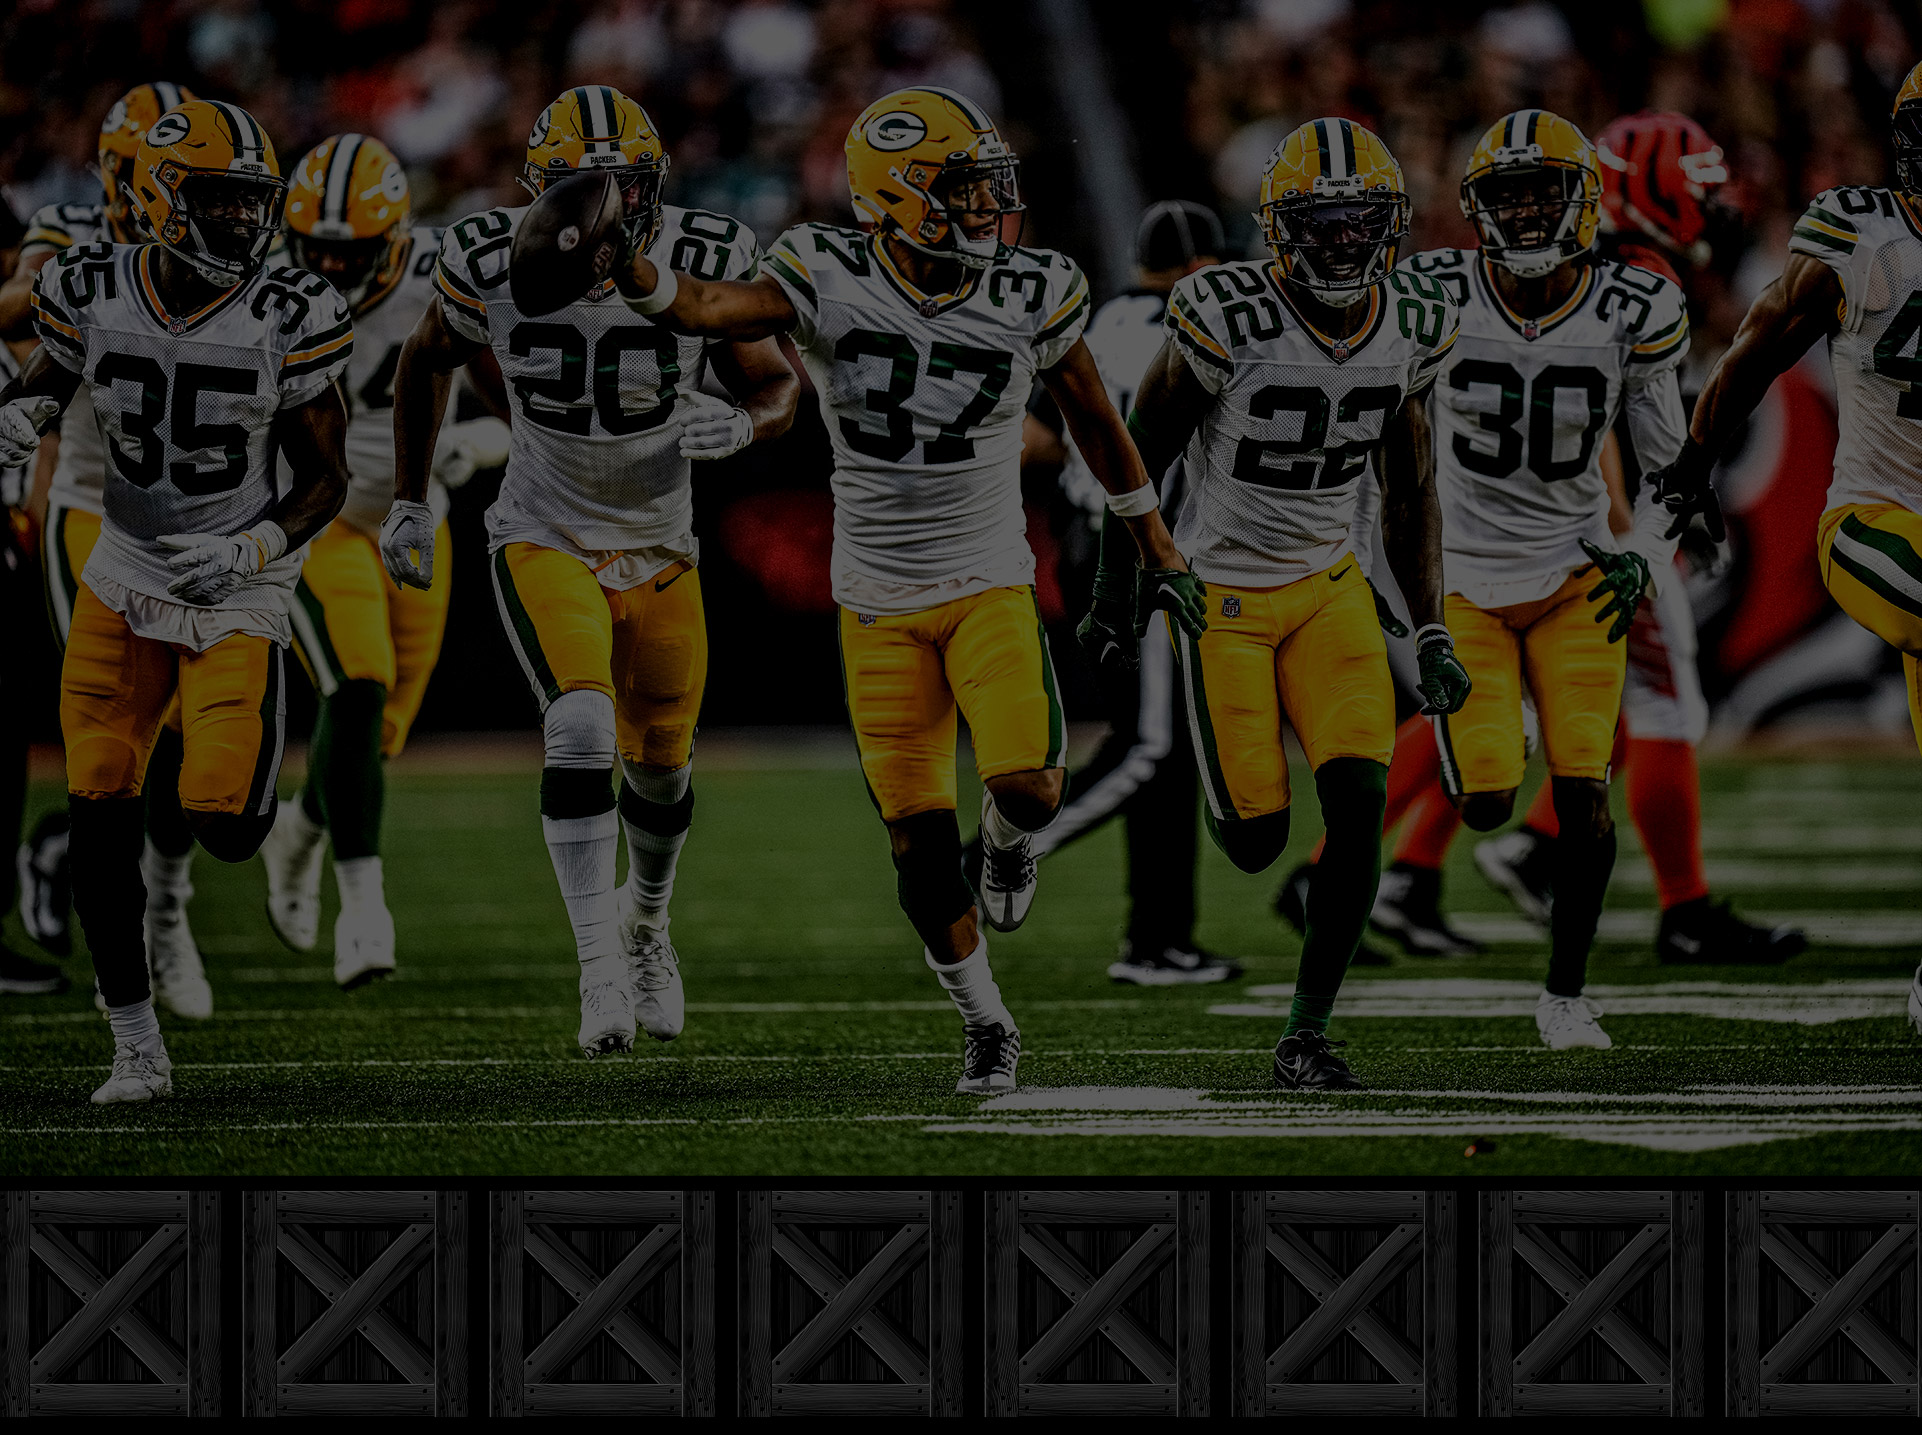 Green Bay Packers Image